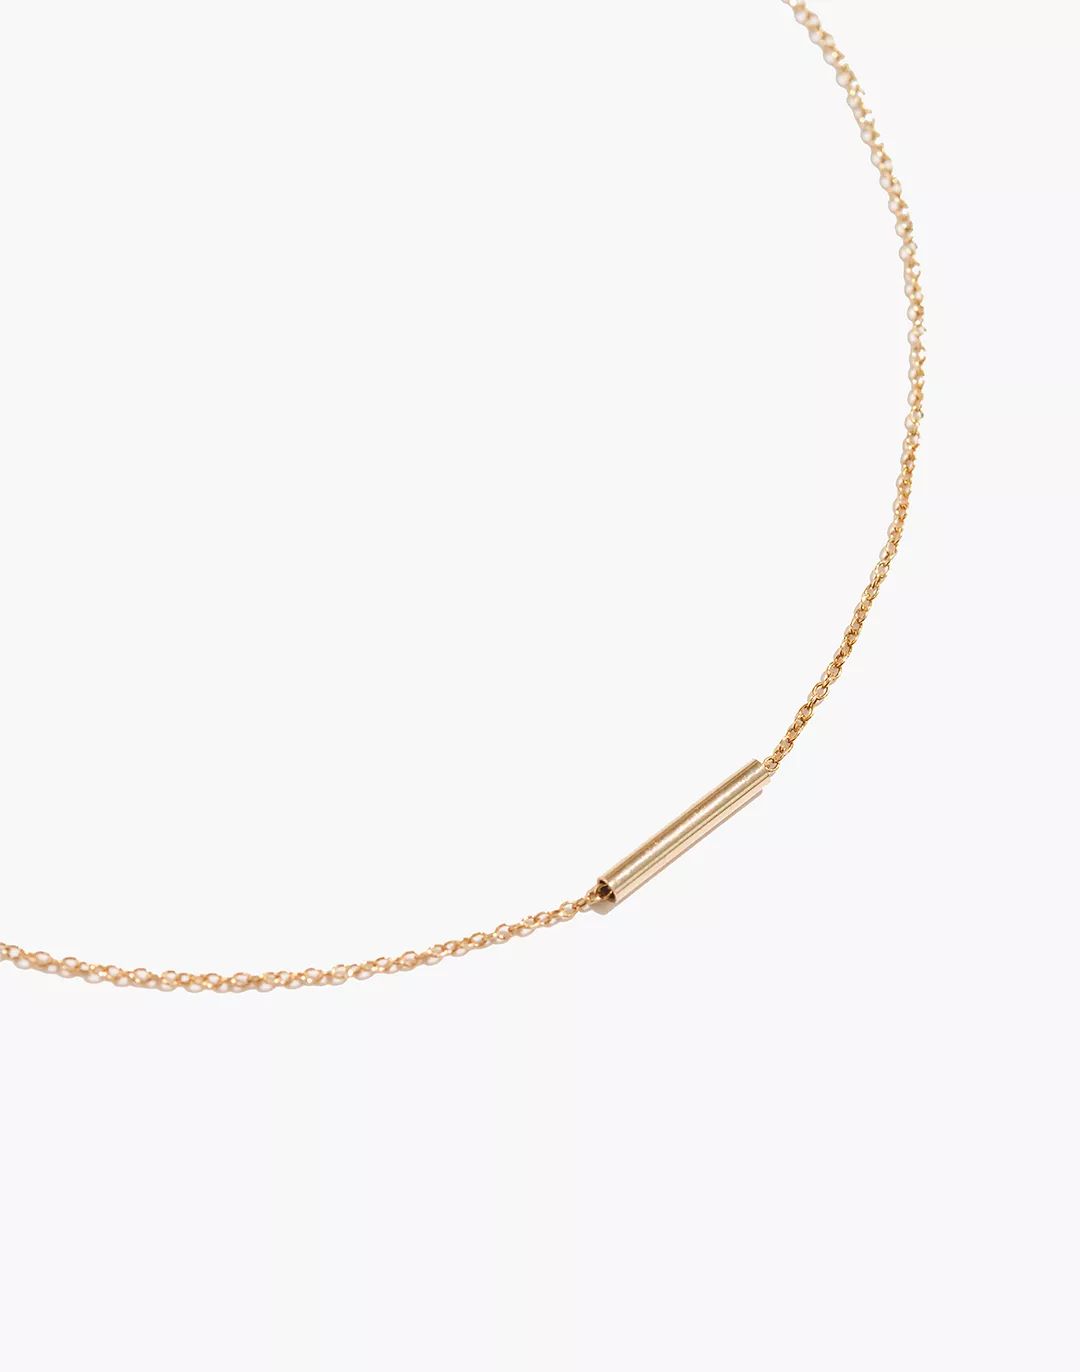 BYCHARI PIPELINE NECKLACE | Madewell